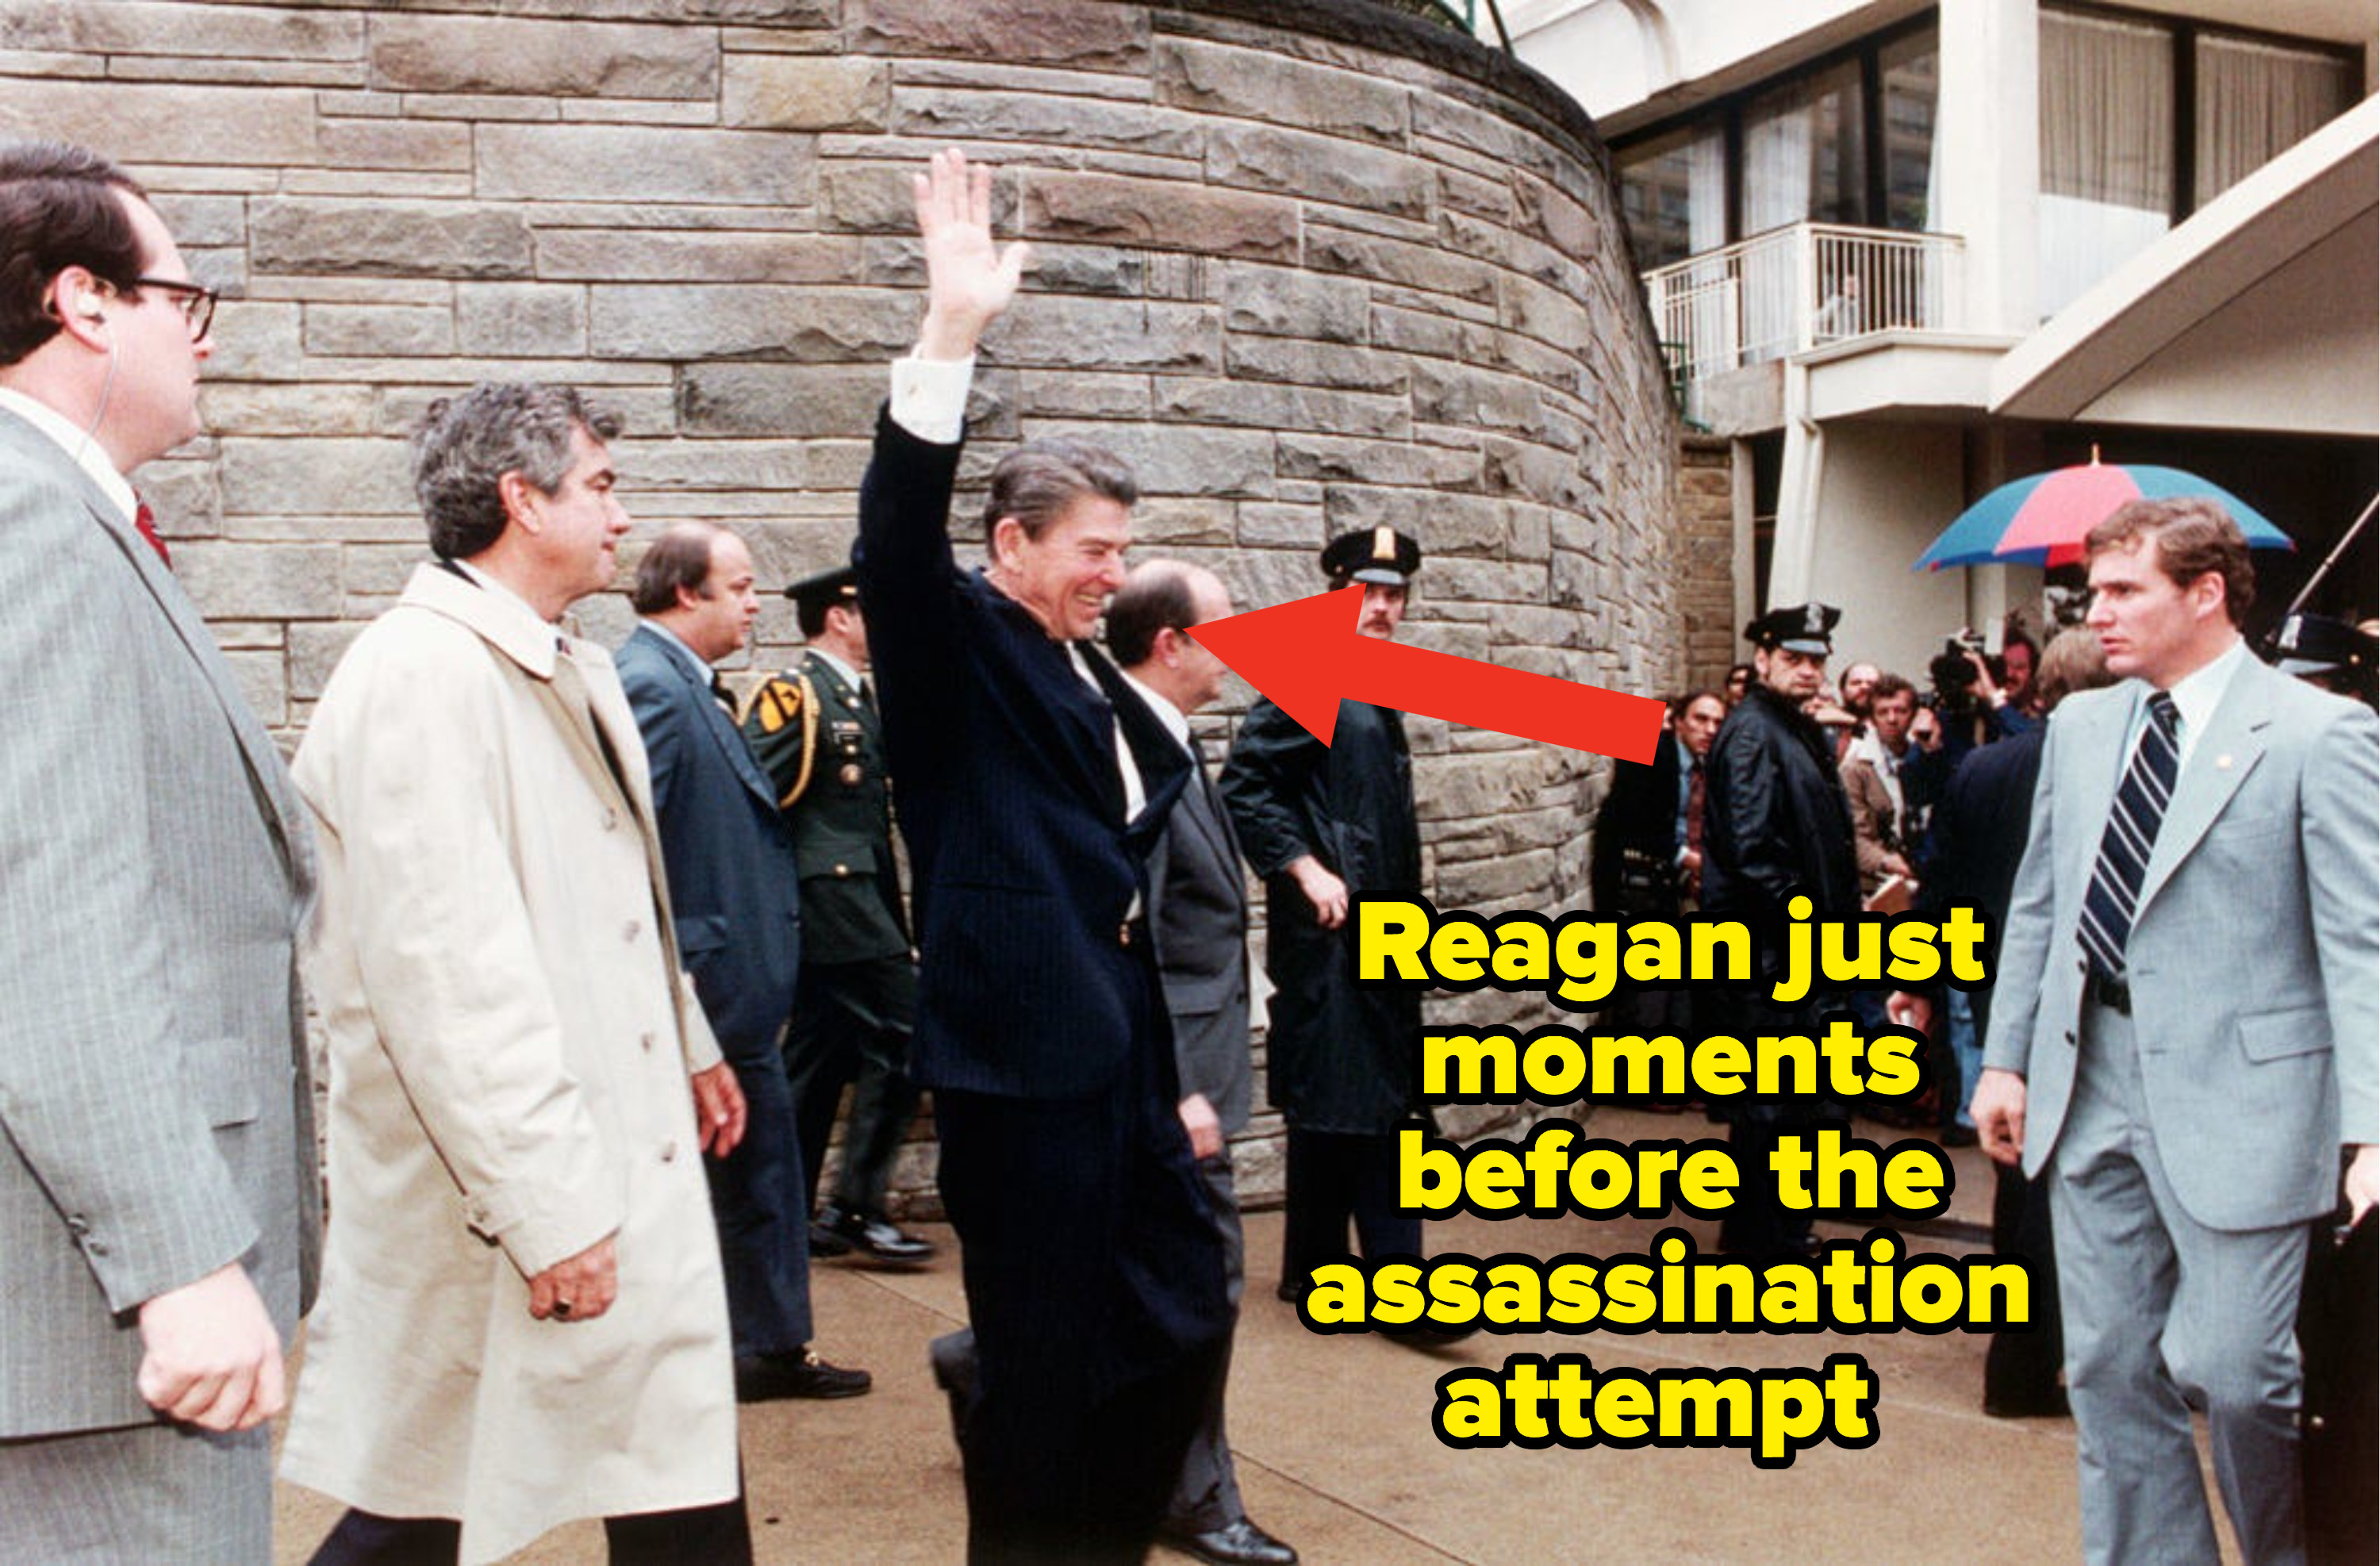 reagan waving at a crowd right before the assassination attempt